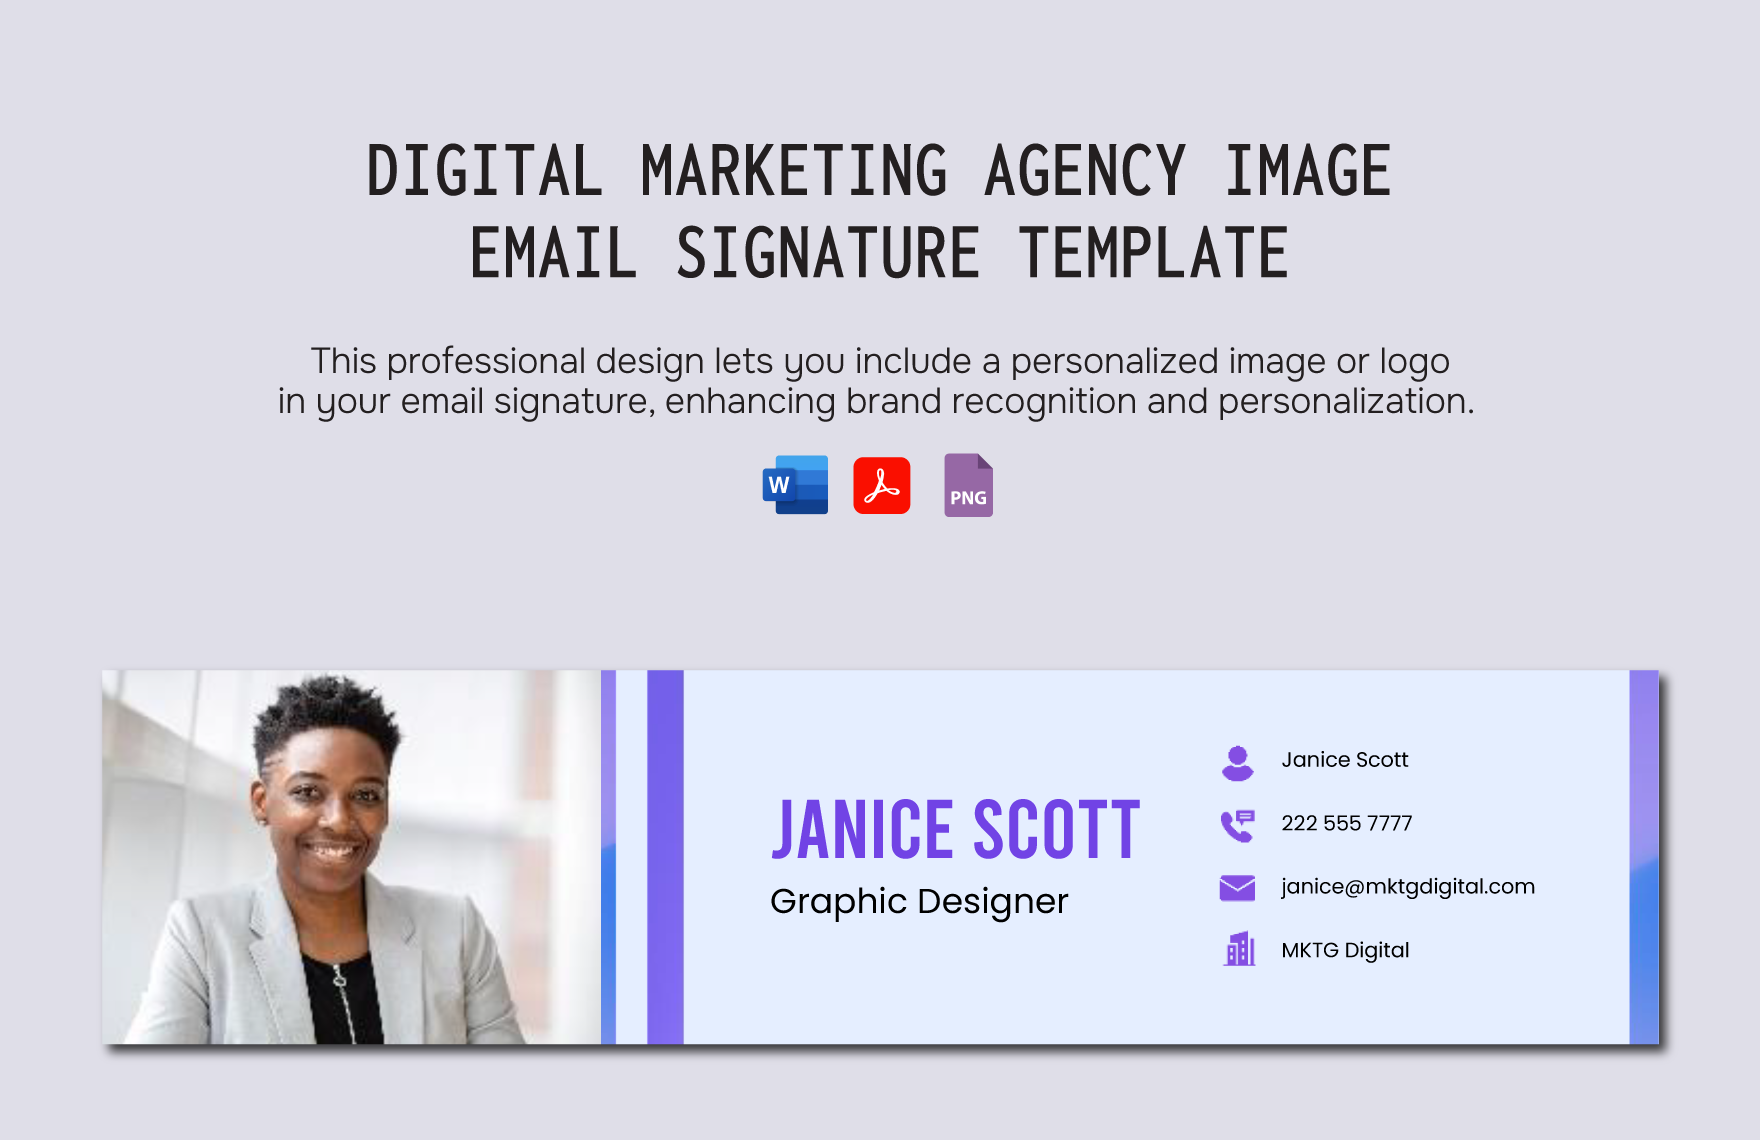 Digital Marketing Agency Image Email Signature Template